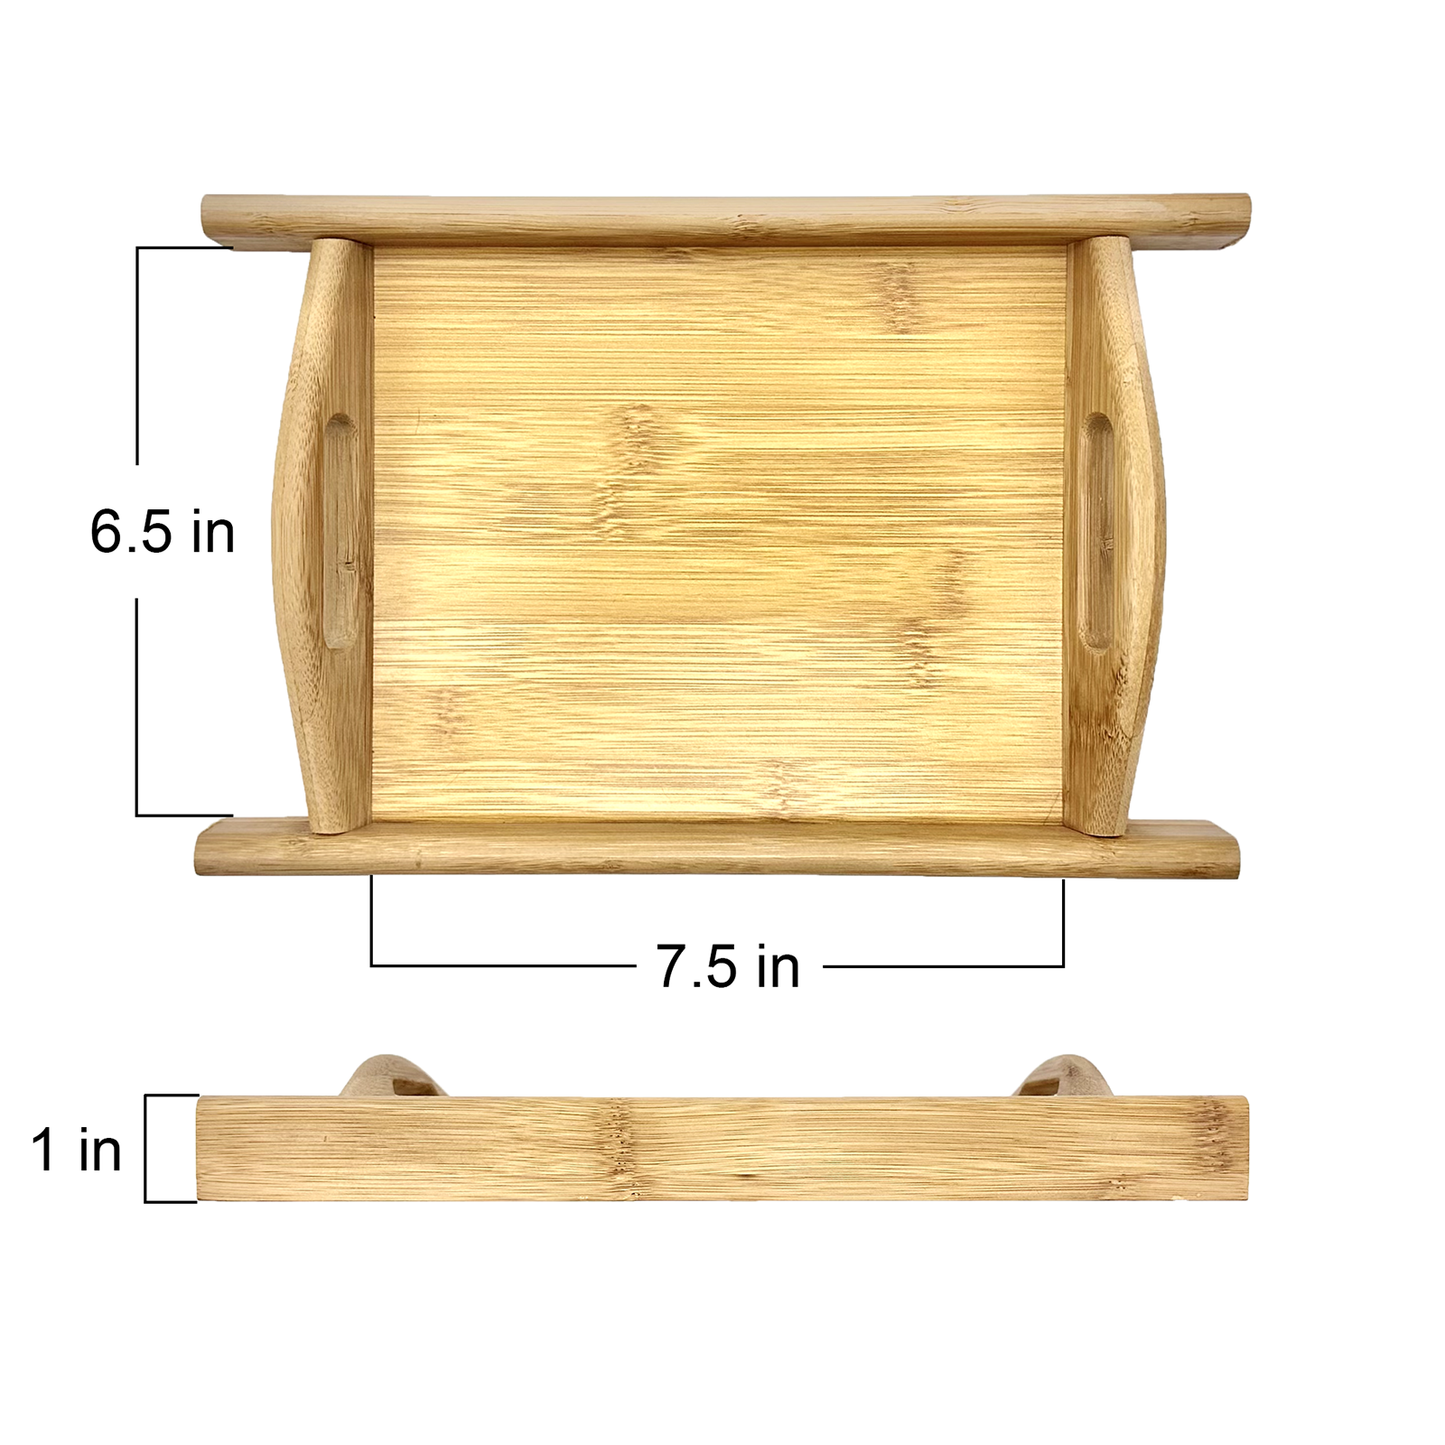 11.5" x 7.5" Bam & Boo Natural Bamboo Serving Tray with Handles